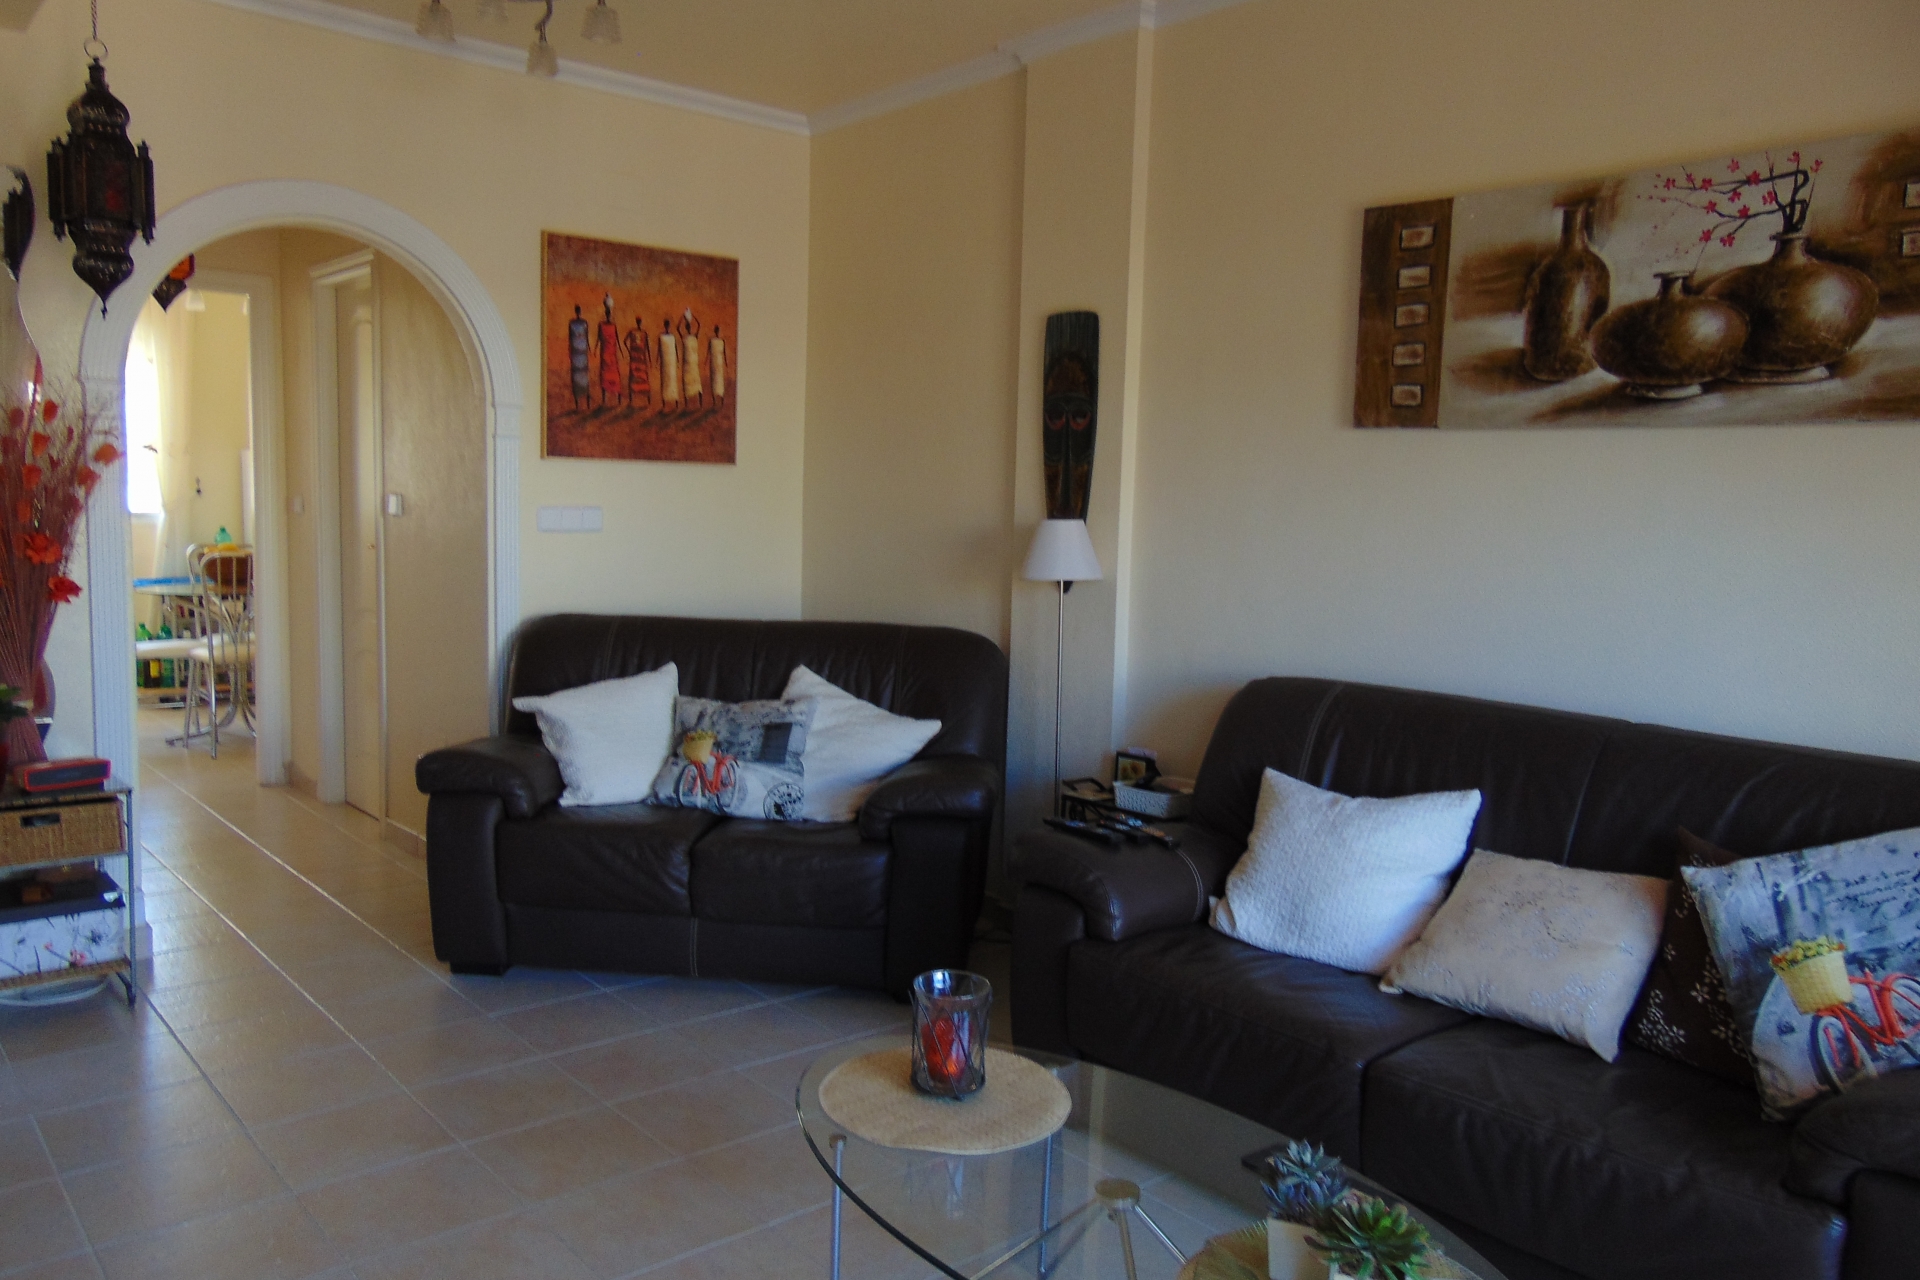 Property Sold - Townhouse for sale - Orihuela Costa - Las Chismosa